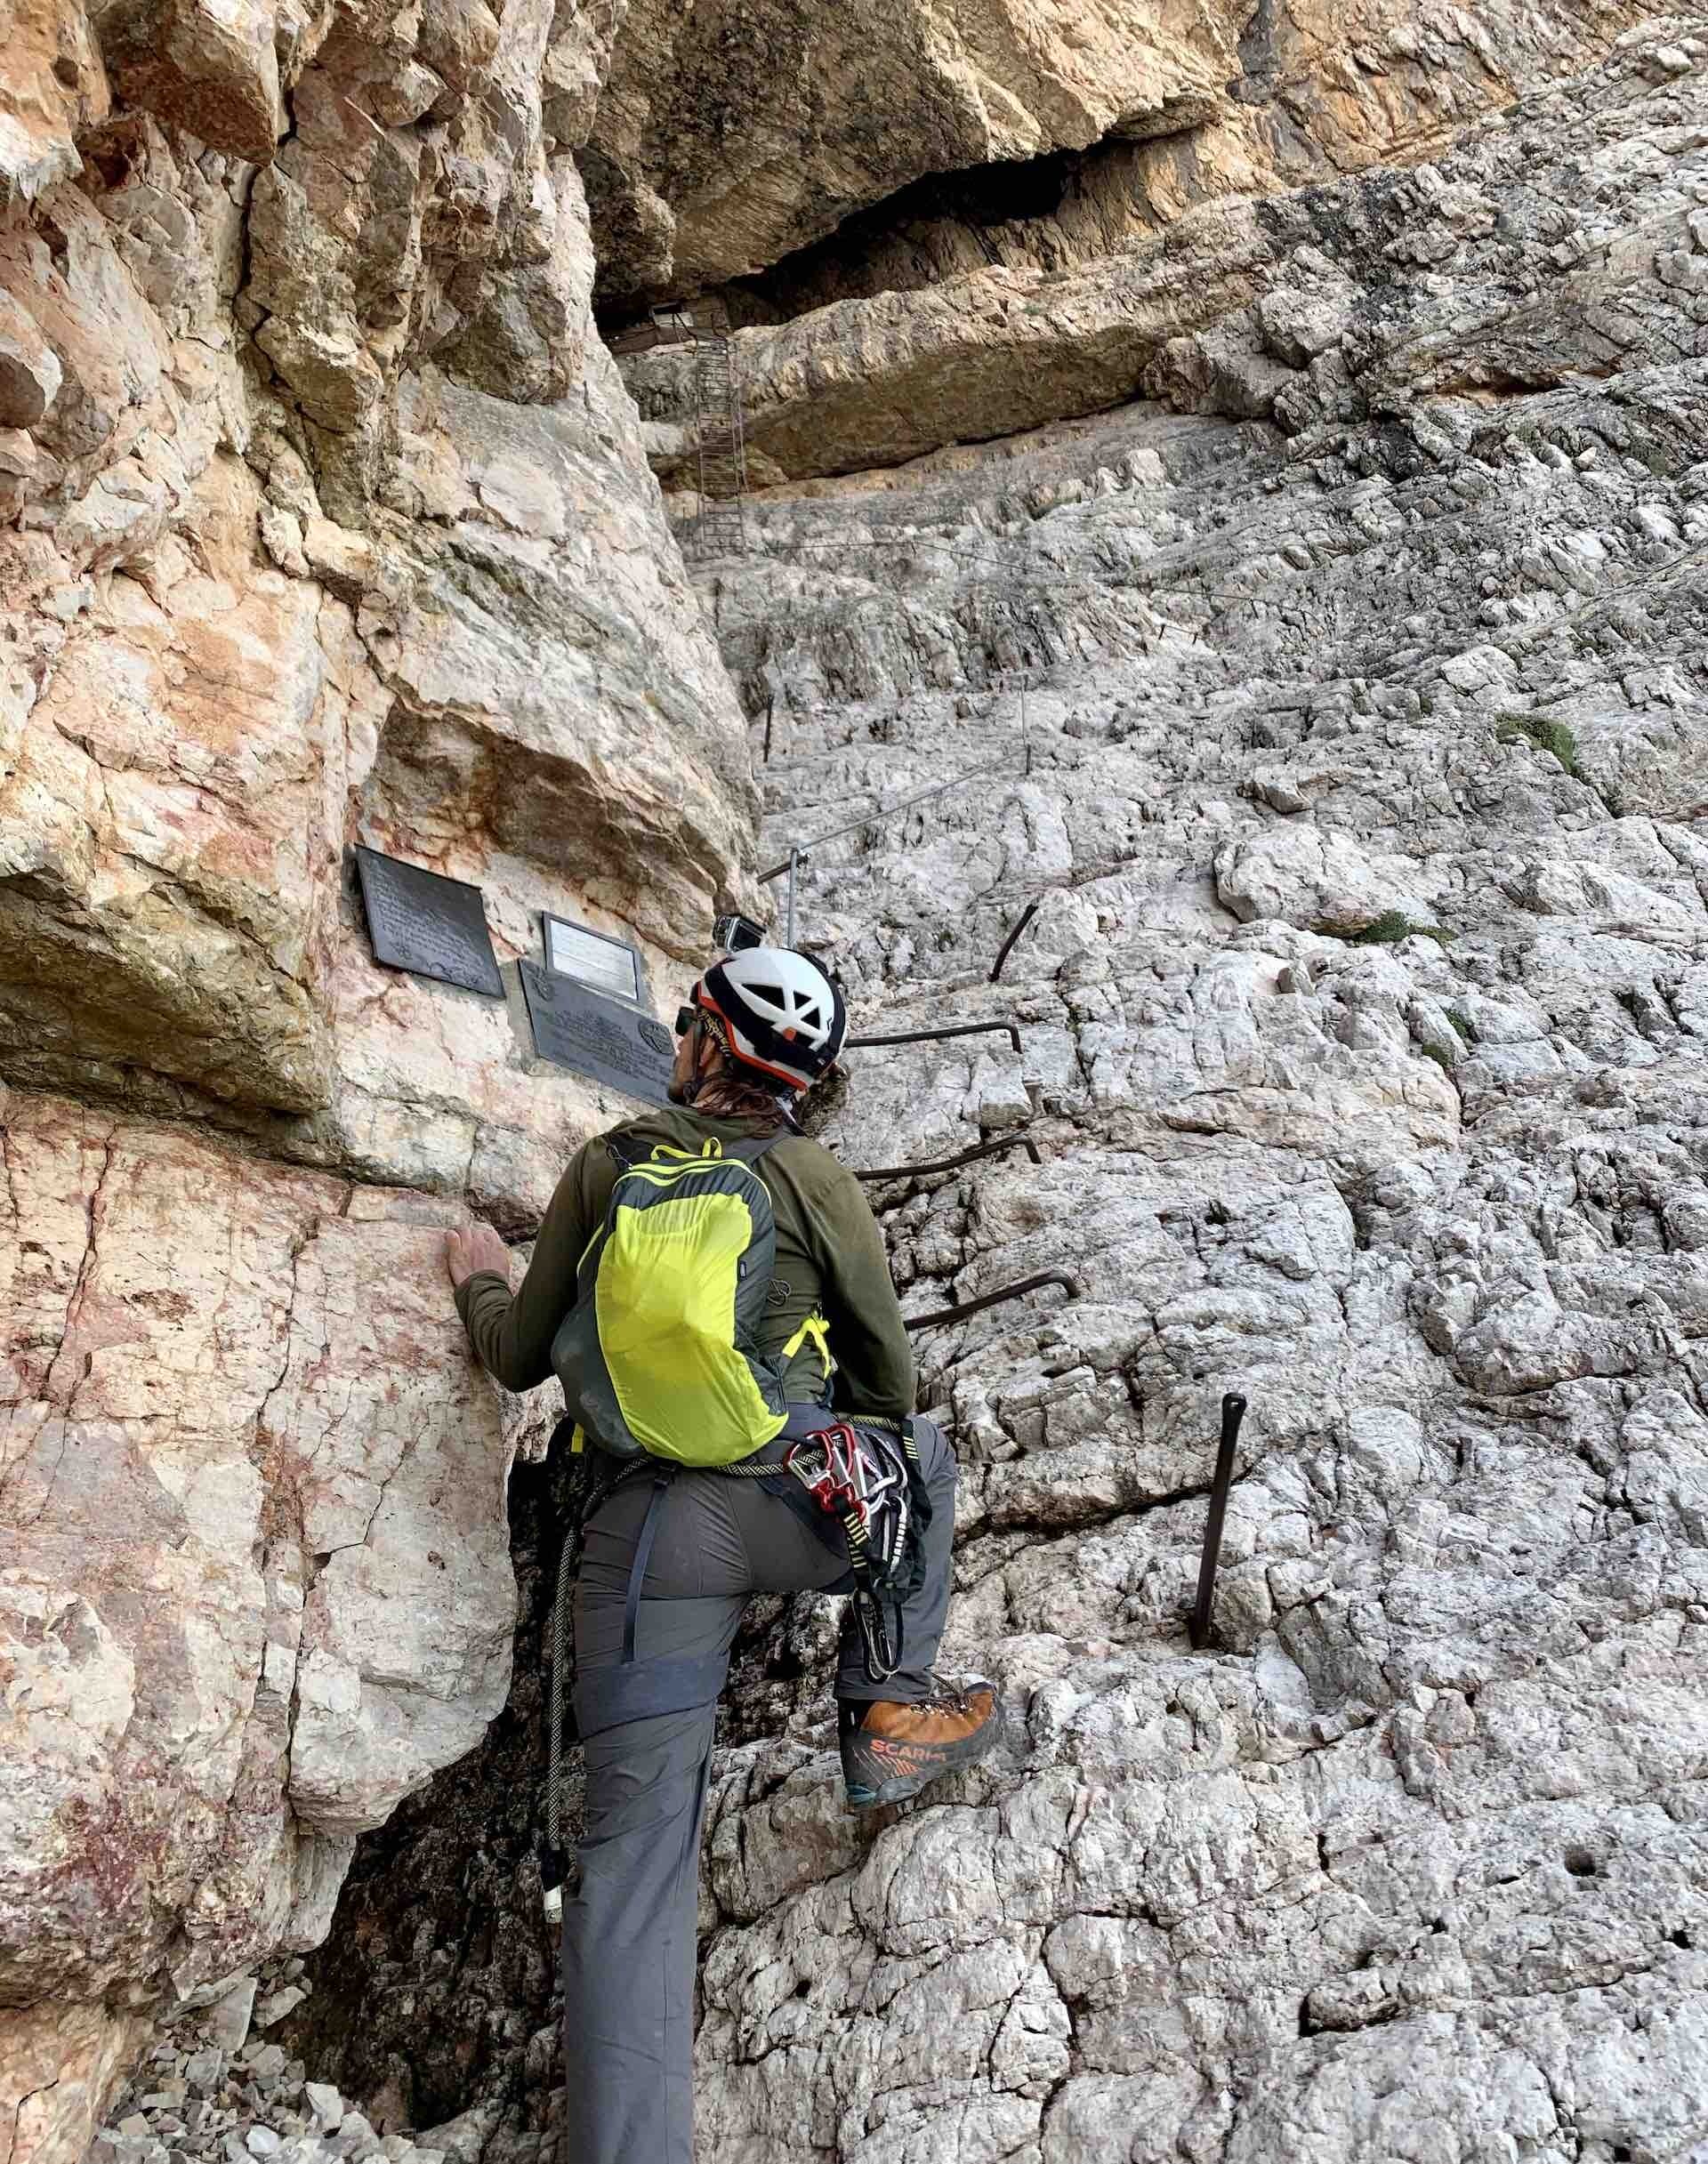 Italy’s Iron Way: When Via Ferrata Routes Aren’t Quite as Straight Forward as Expected, wendy bruere, perso, rock, cliff